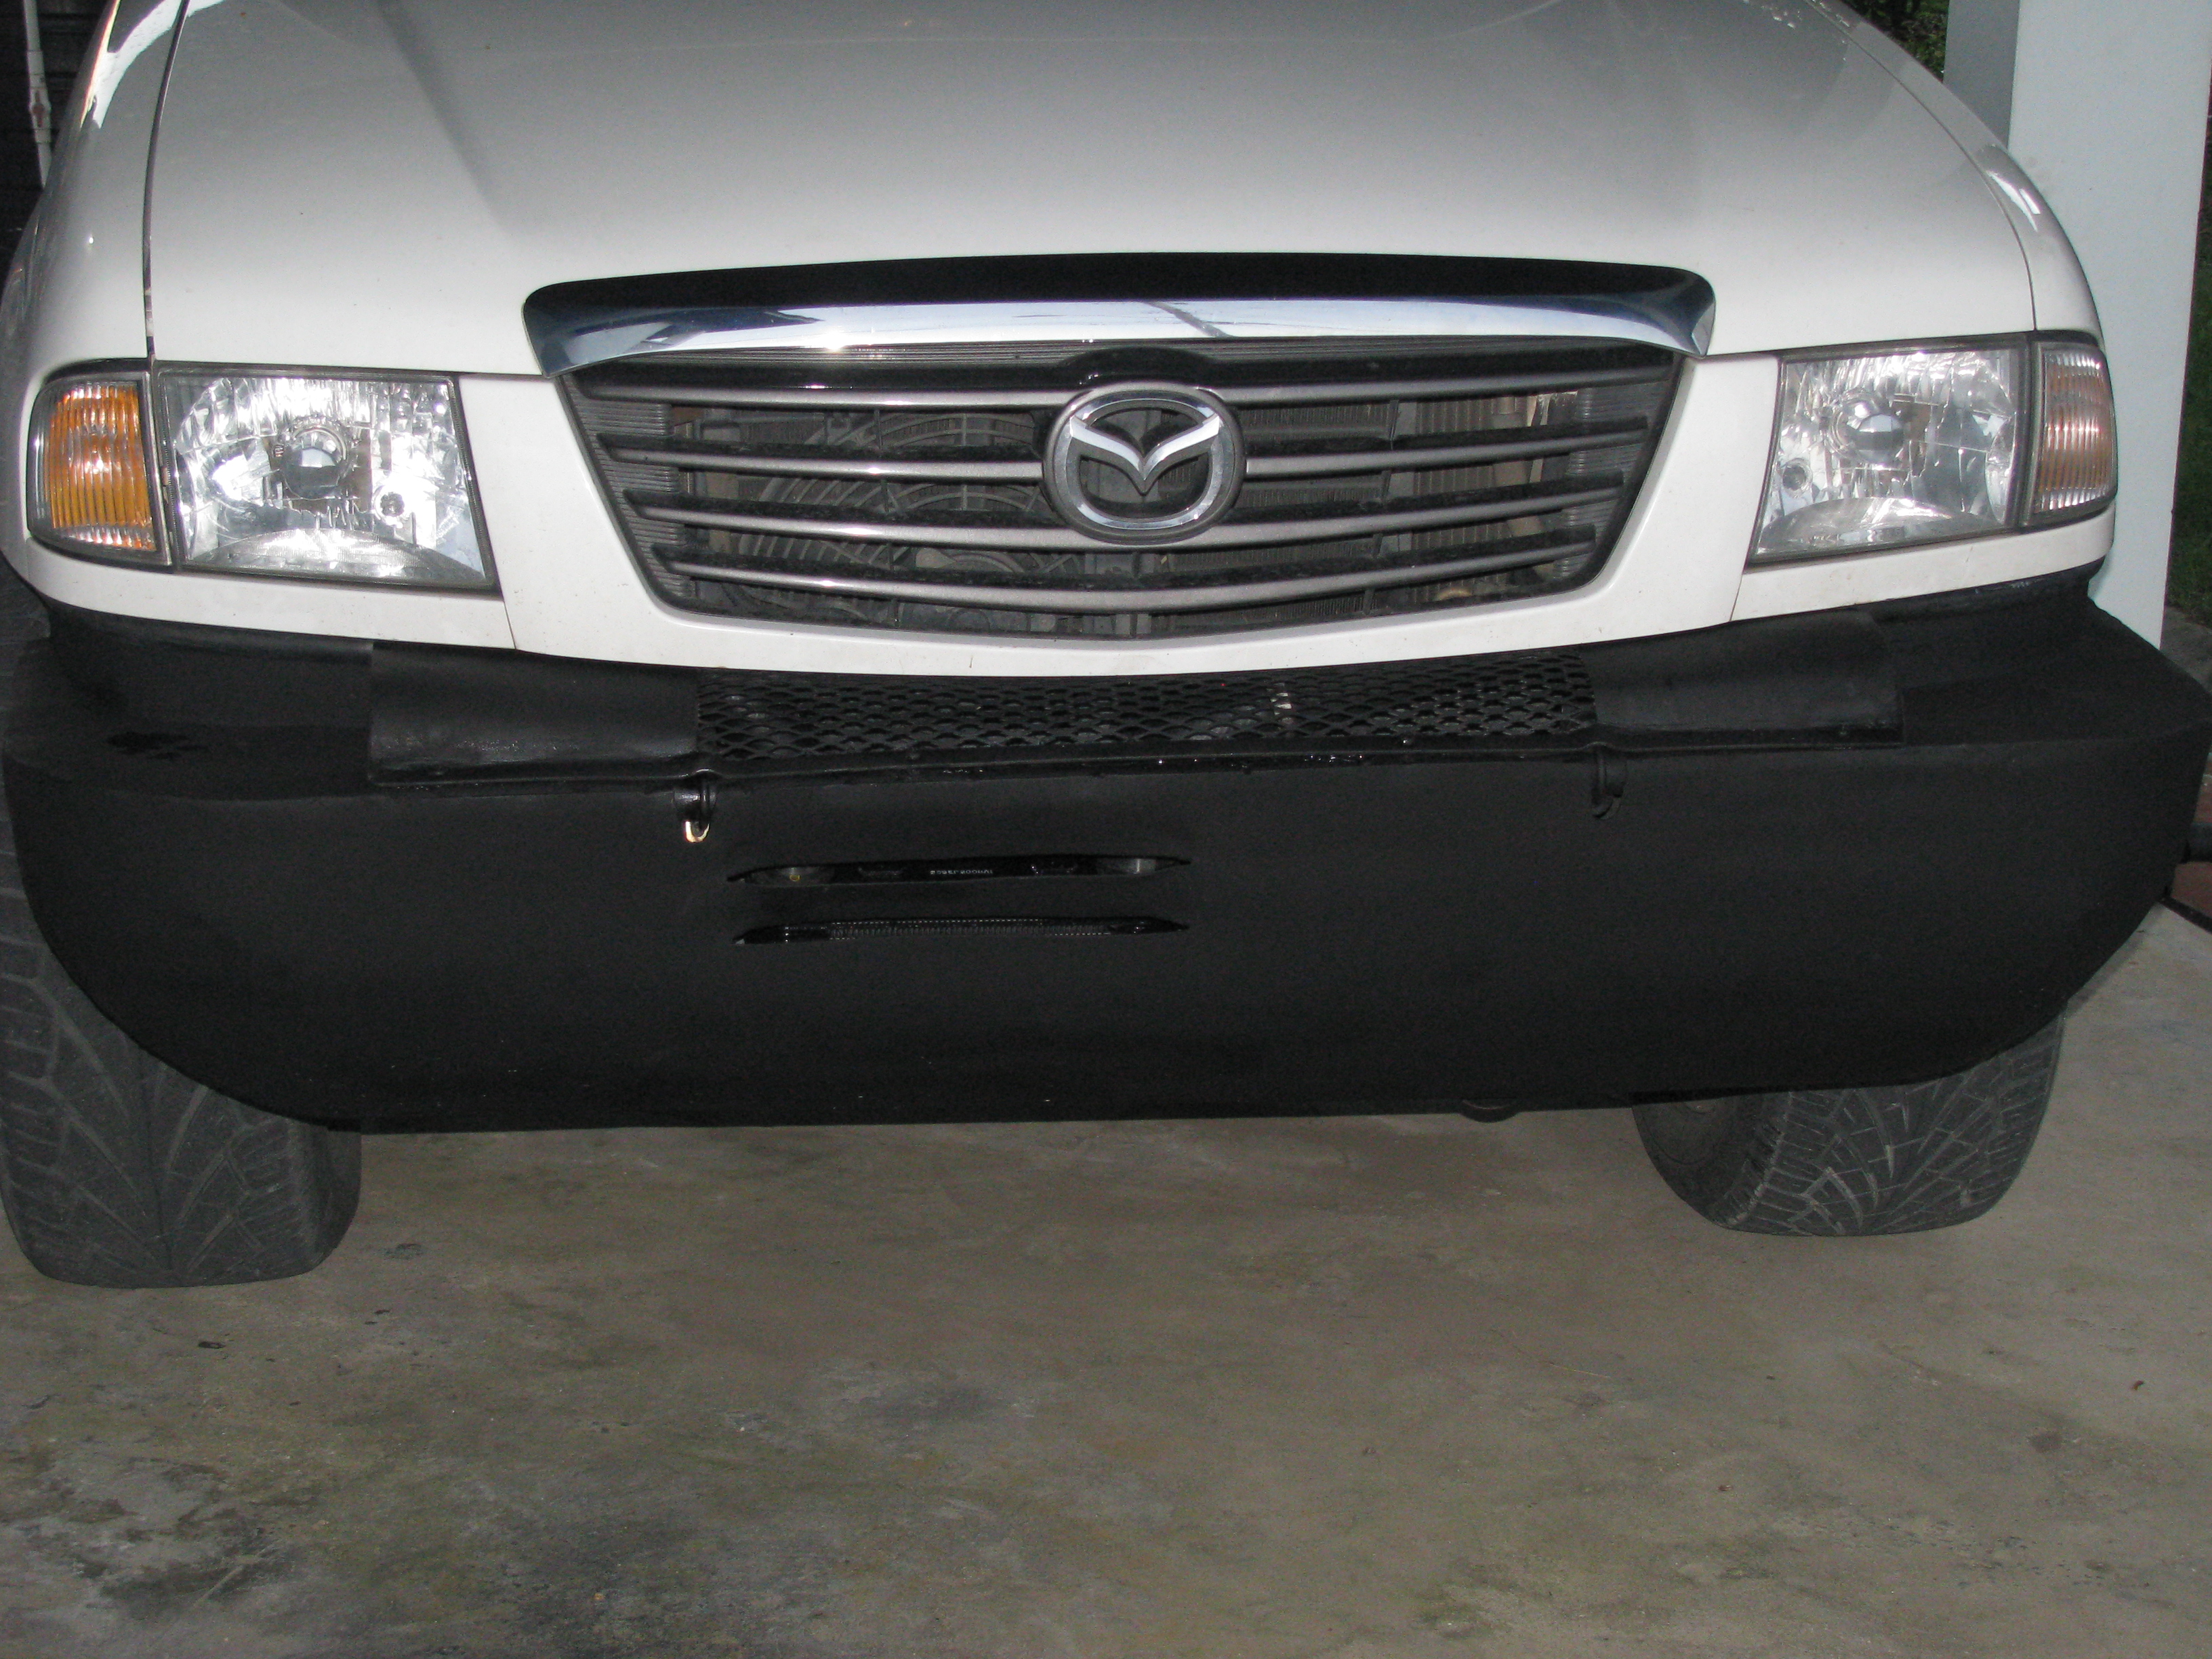 Mazda B2500 Turbodiesel Brush Bumper: Completed | Flickr - Photo ...